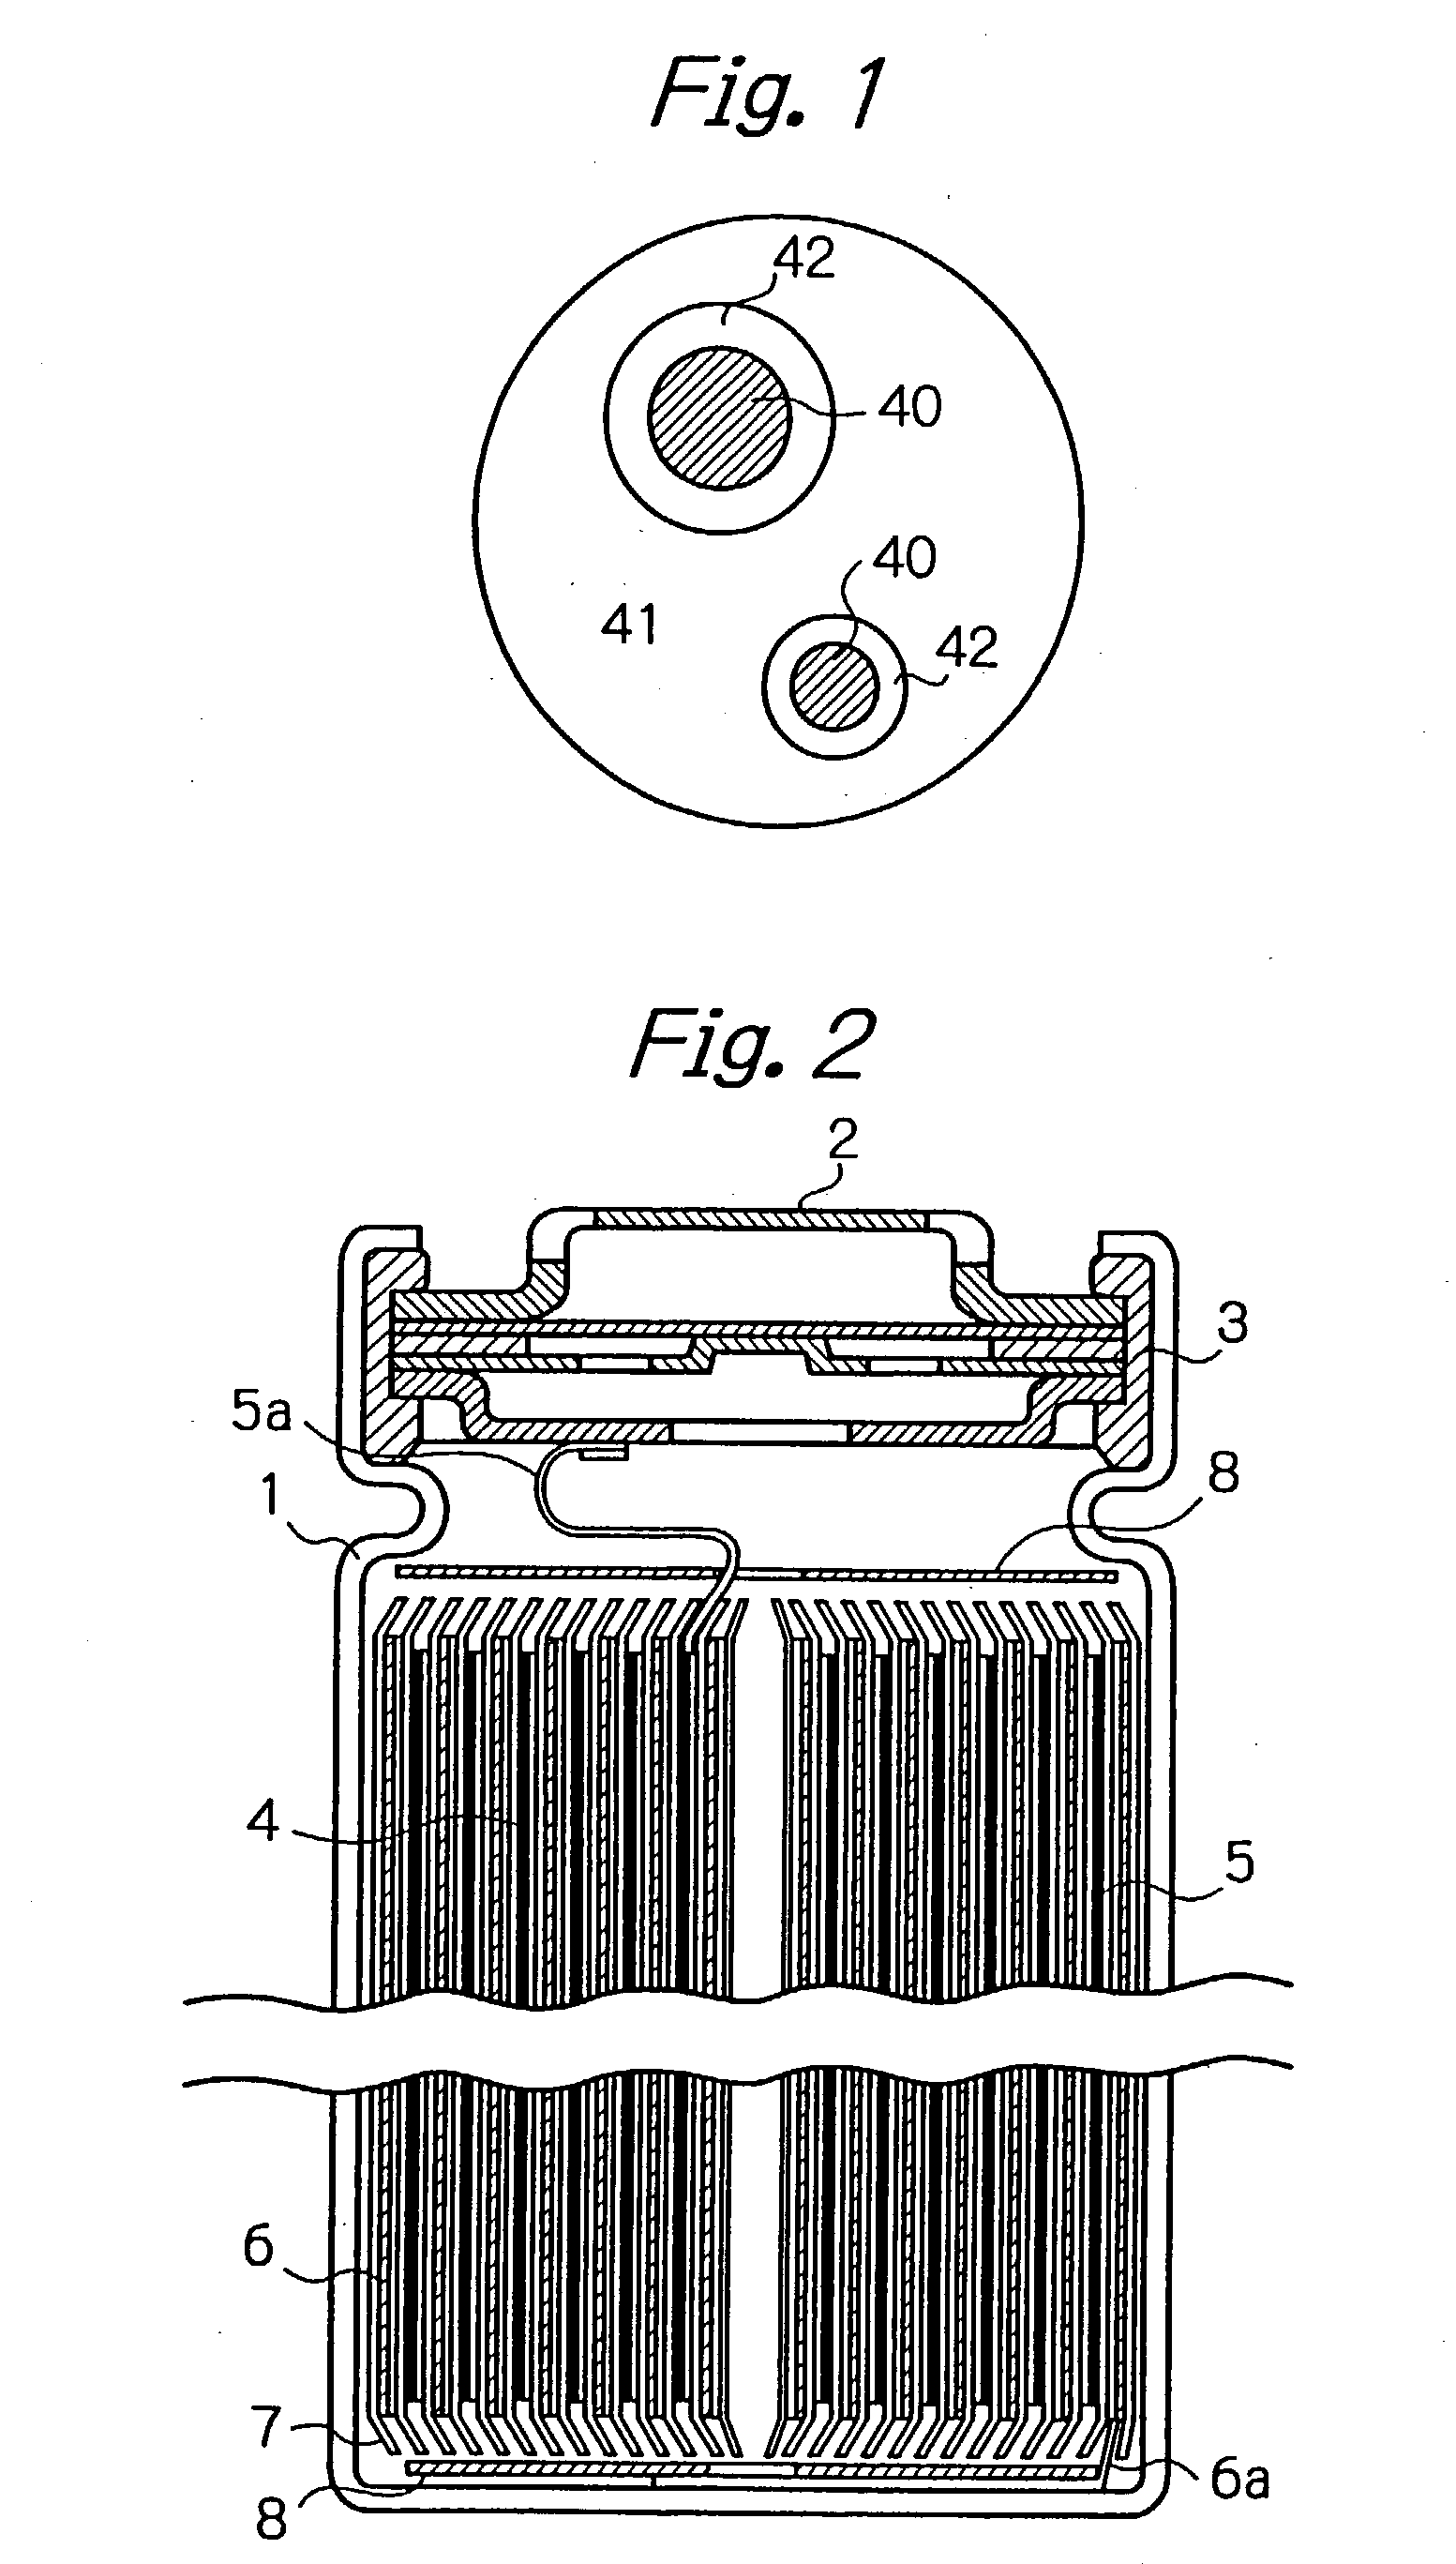 Process for manufacture of negative electrode material for a non-aqueous electrolyte secondary battery